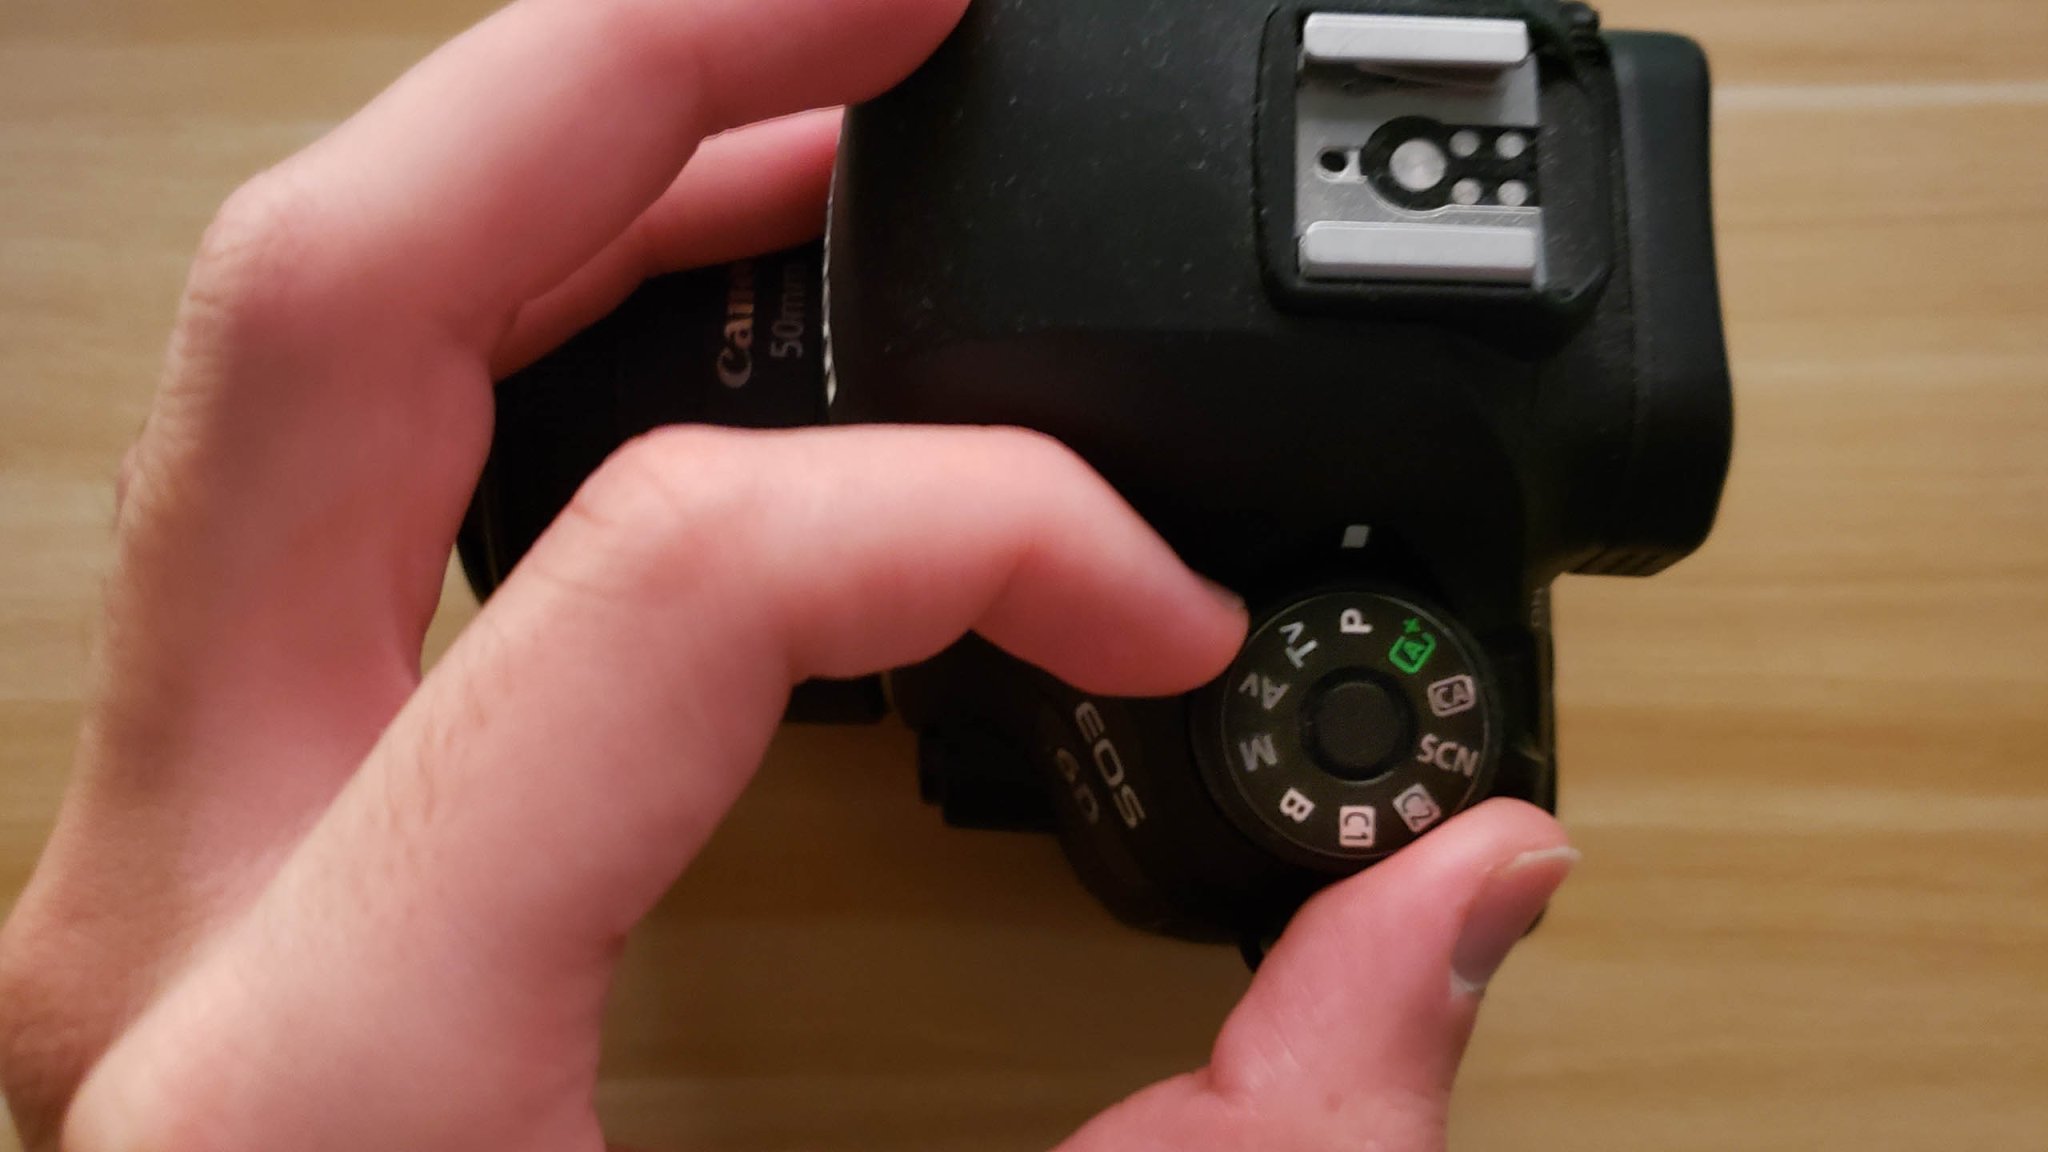 Photography 101: What is Program mode on a camera?